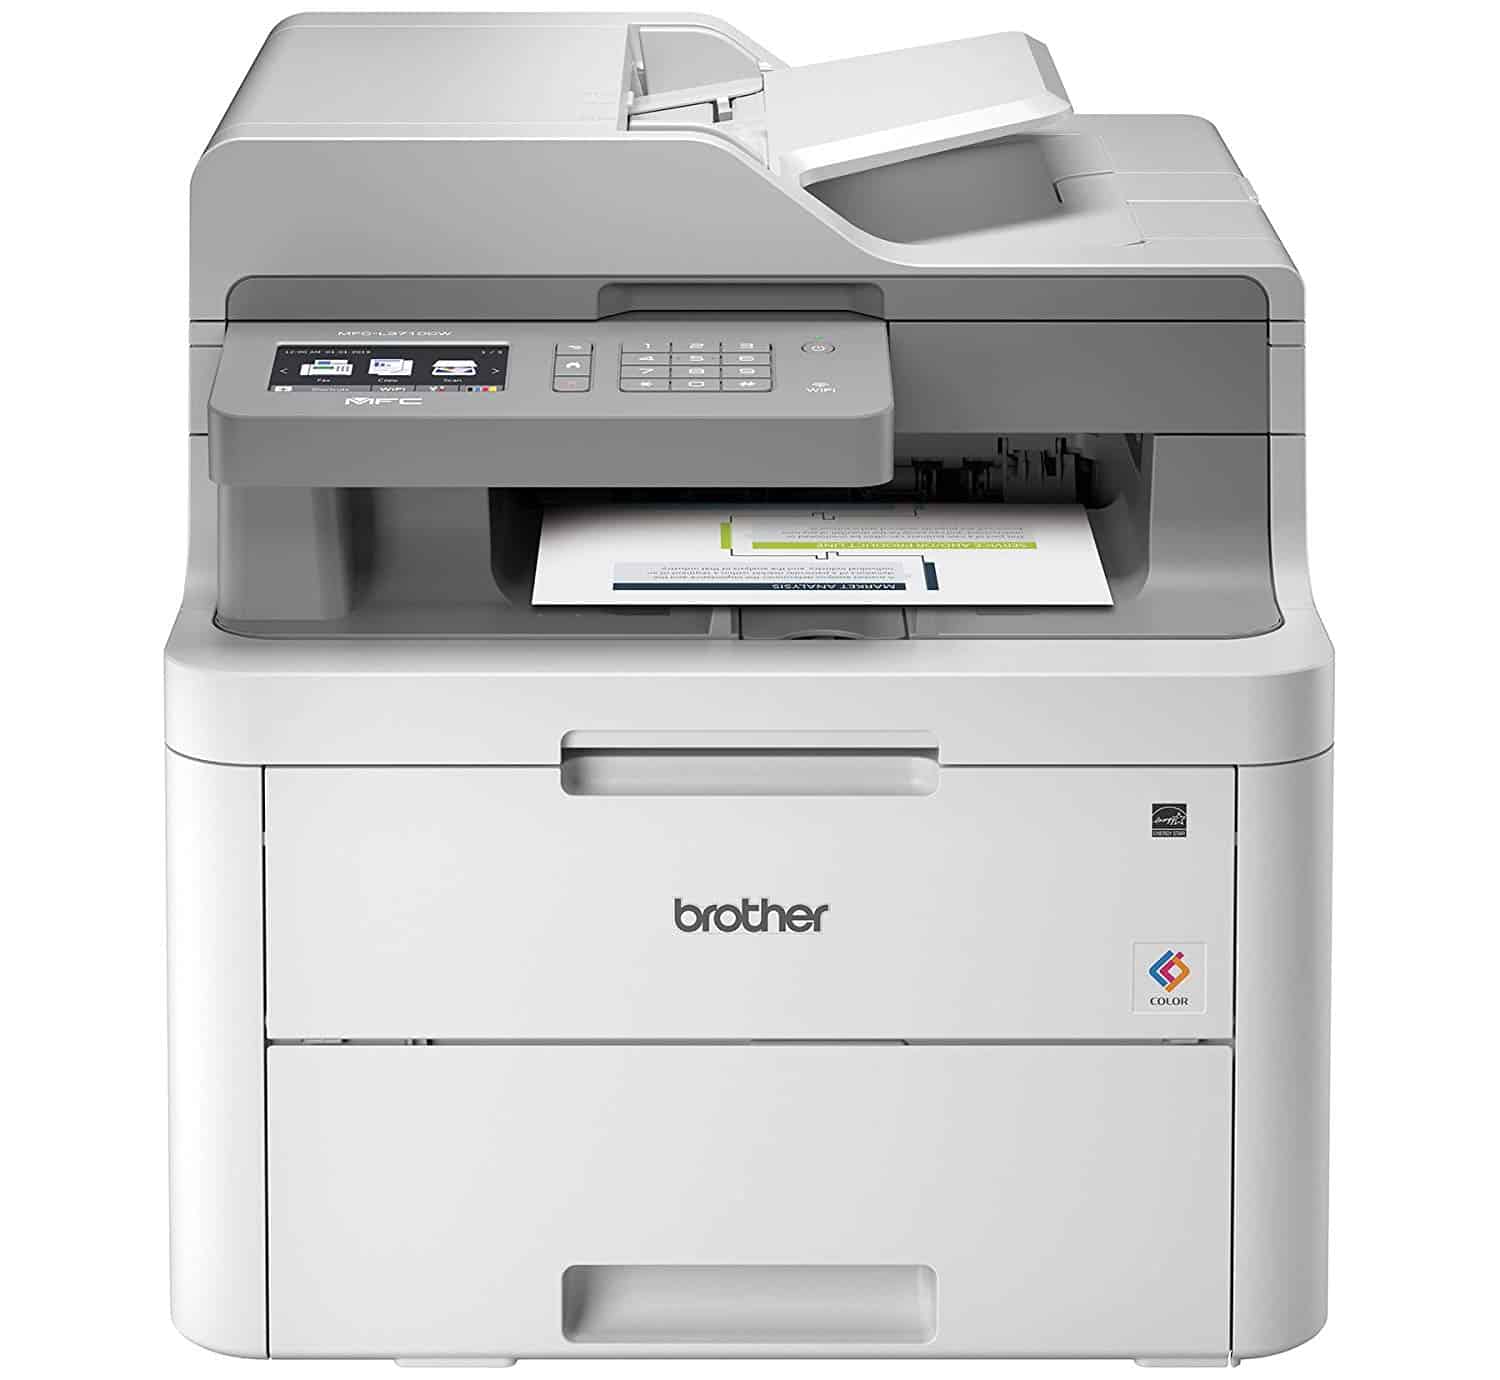 3. Brother MFC L3710CW Compact Digital Color All In One Printer Providing Laser Printer Quality Results With Wireless 